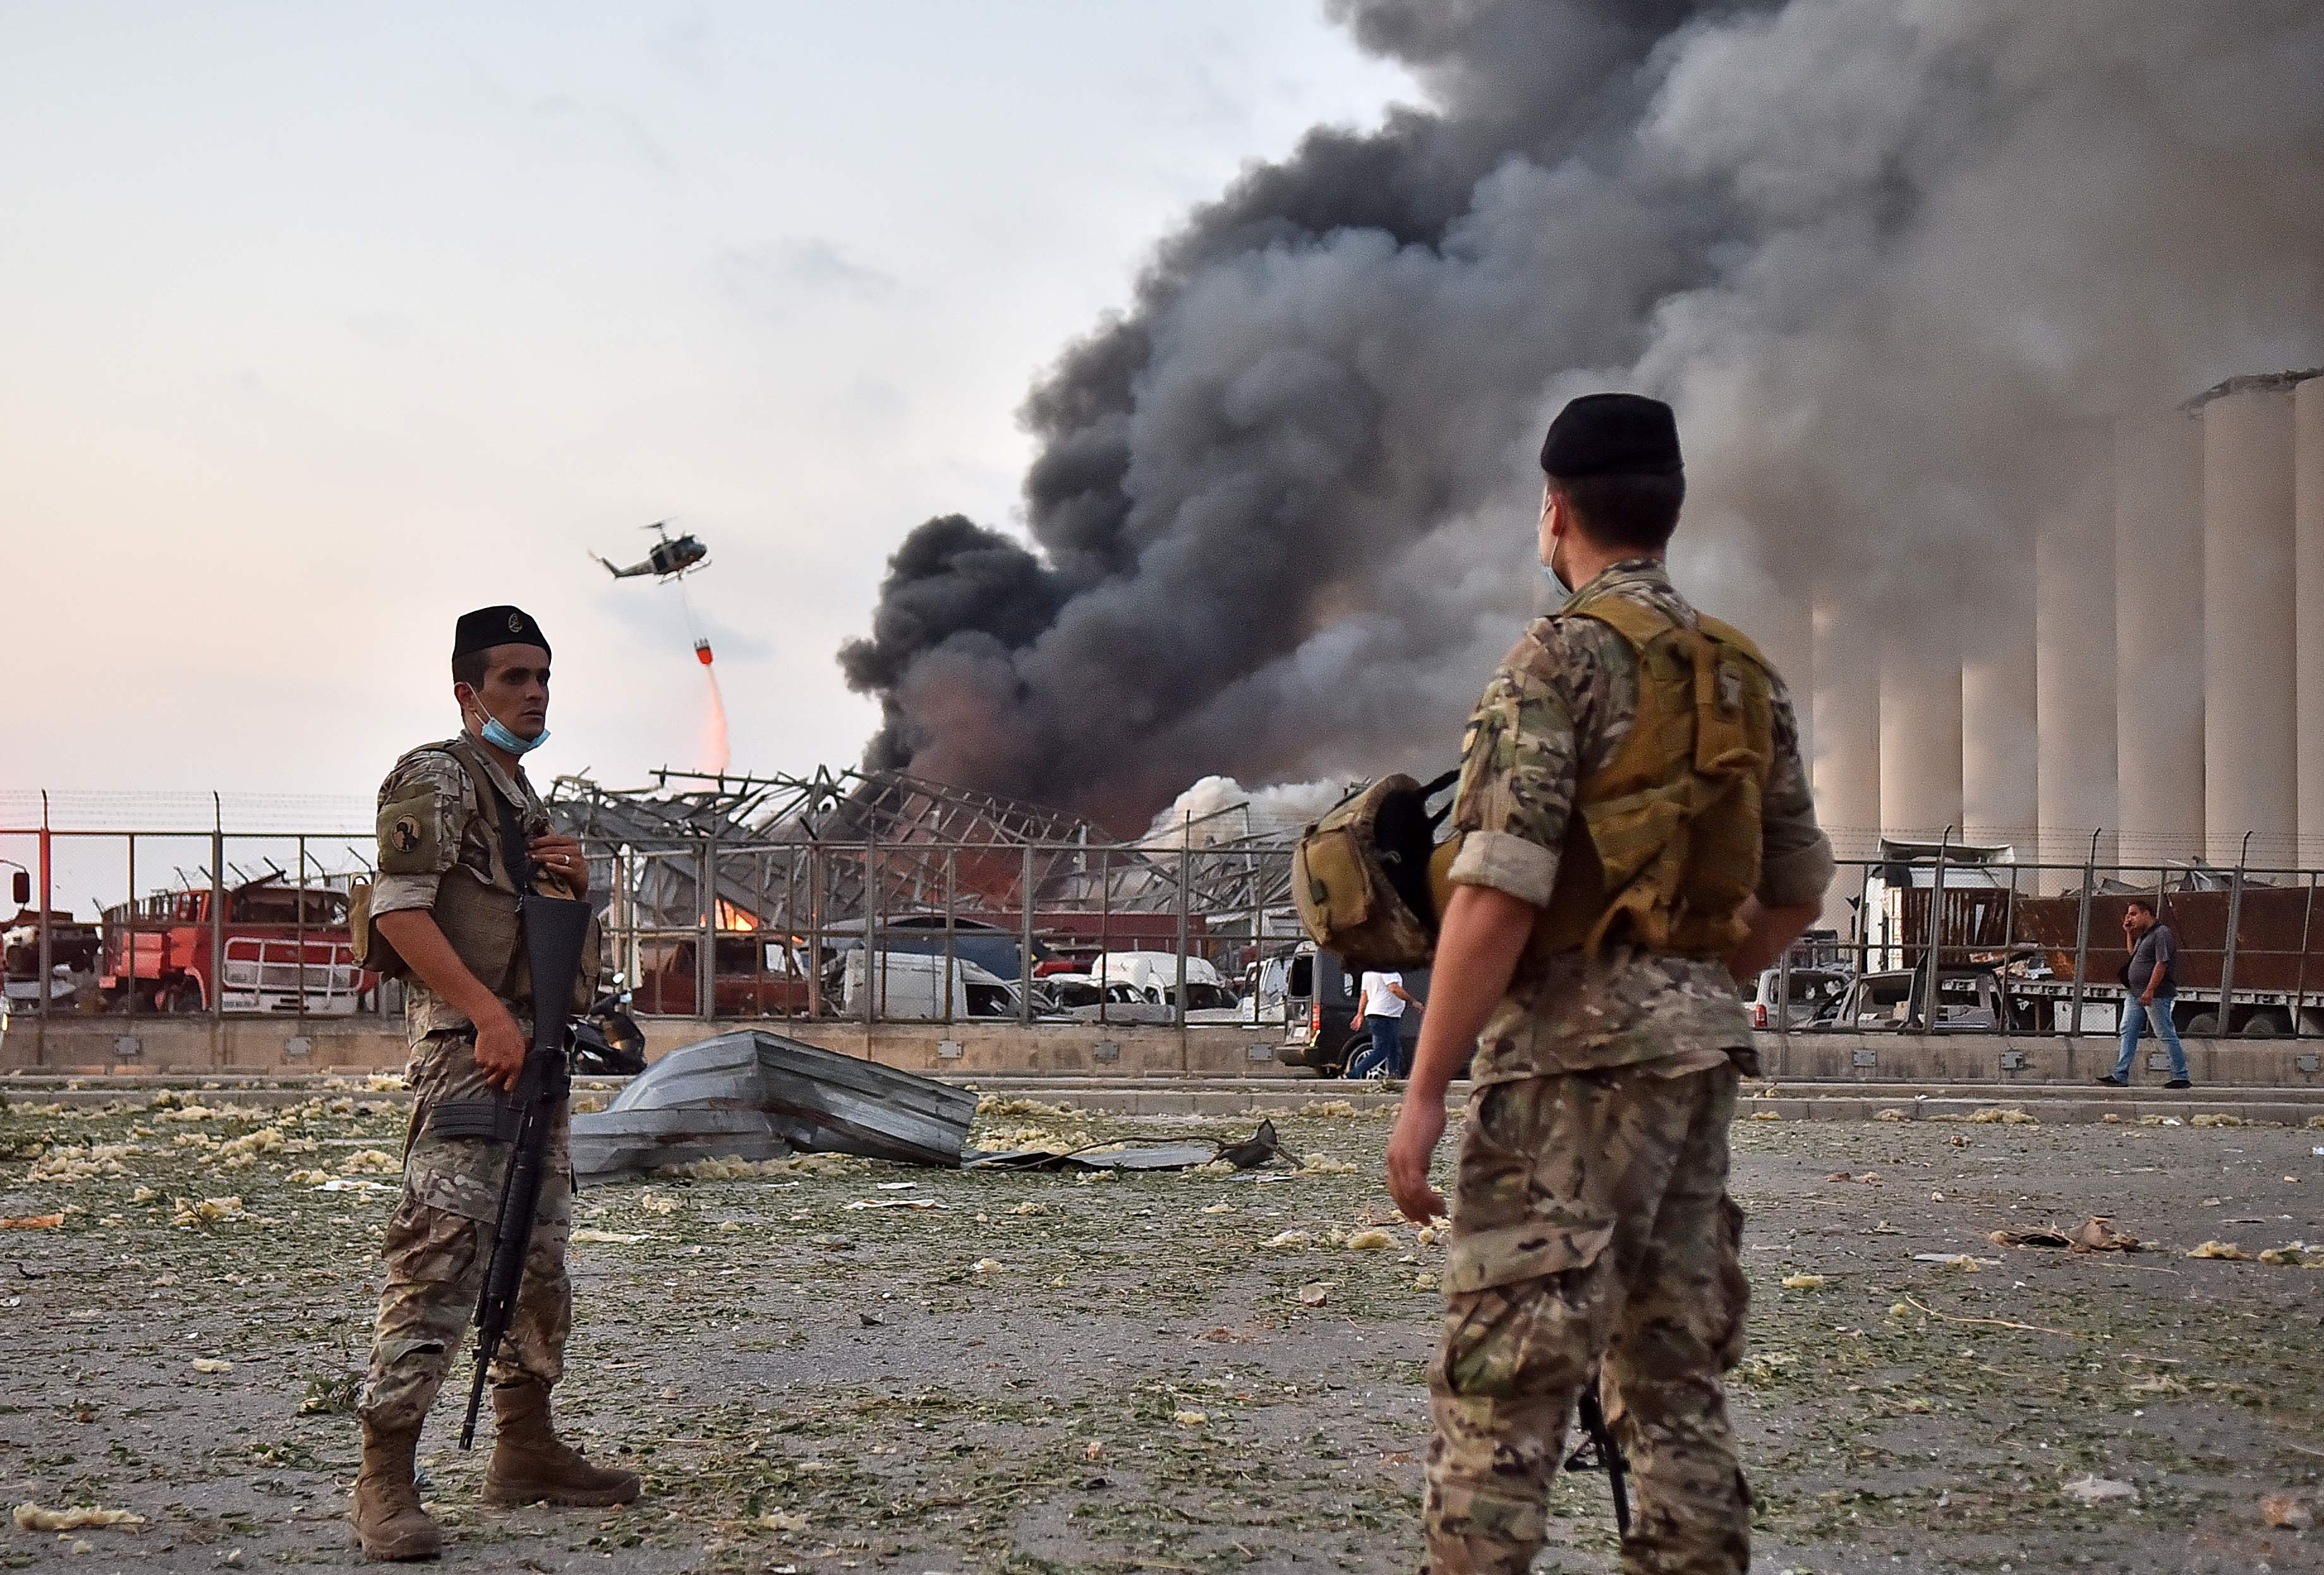 Lebanese army soldiers stand while a helicopter puts out a fire at the scene of the explosion. (AFP/Getty Images)